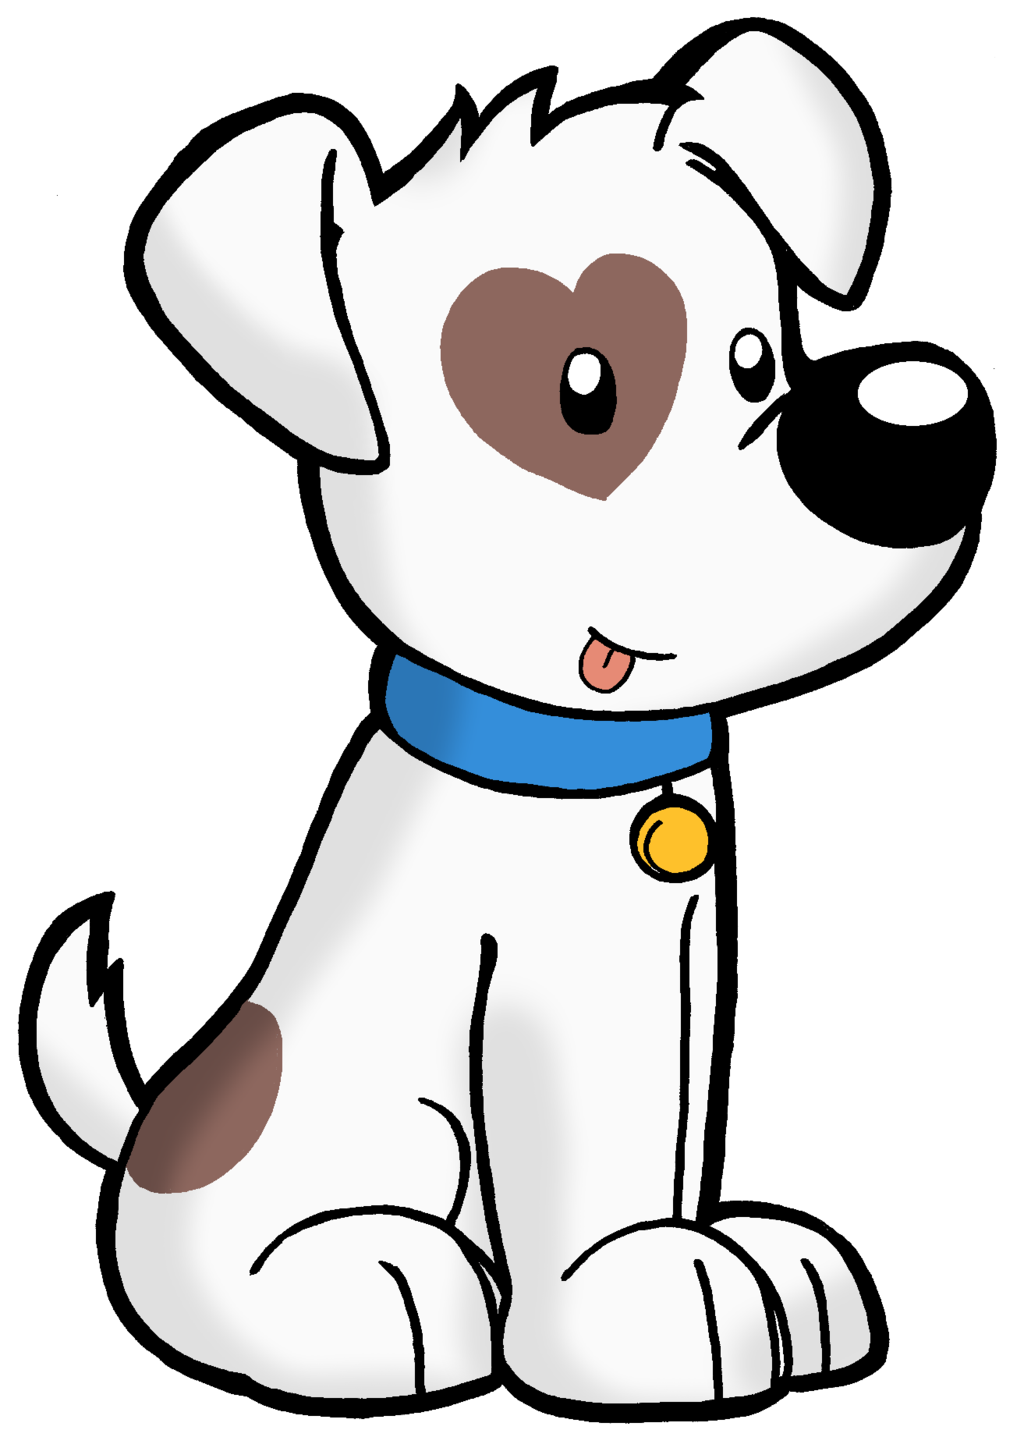 Dog Images Cartoon | Free download on ClipArtMag